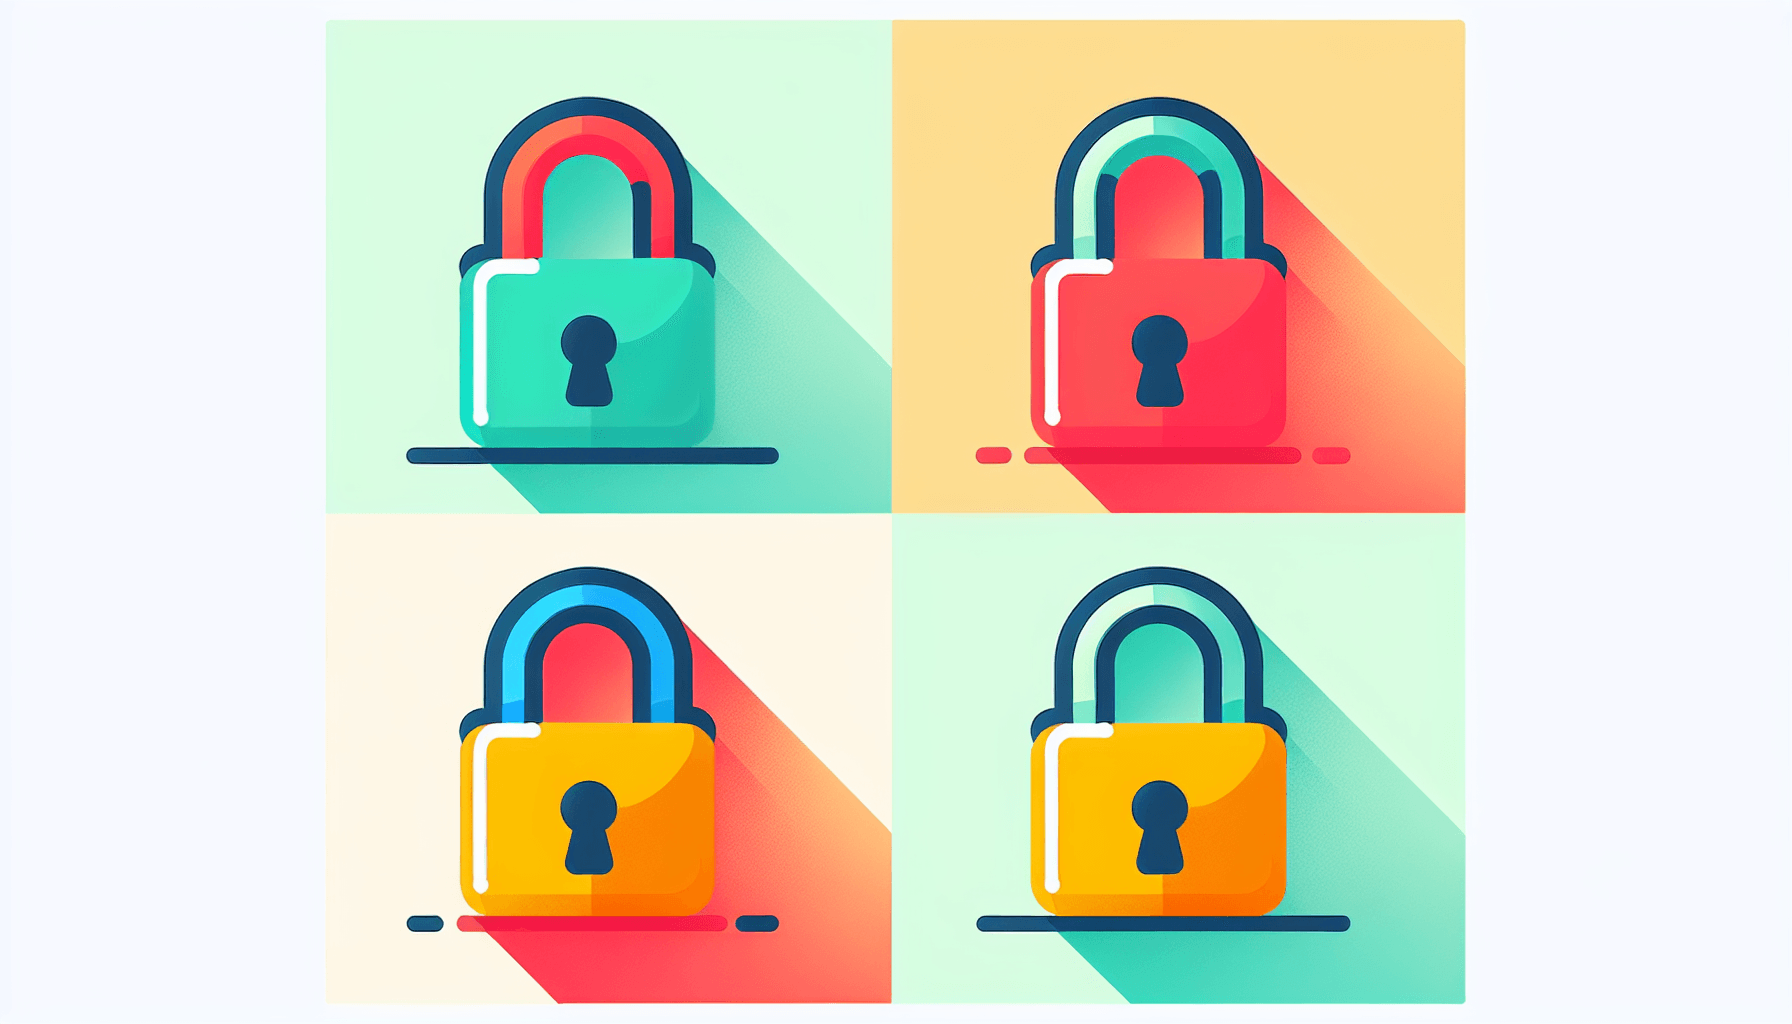 Padlock in flat illustration style and white background, red #f47574, green #88c7a8, yellow #fcc44b, and blue #645bc8 colors.